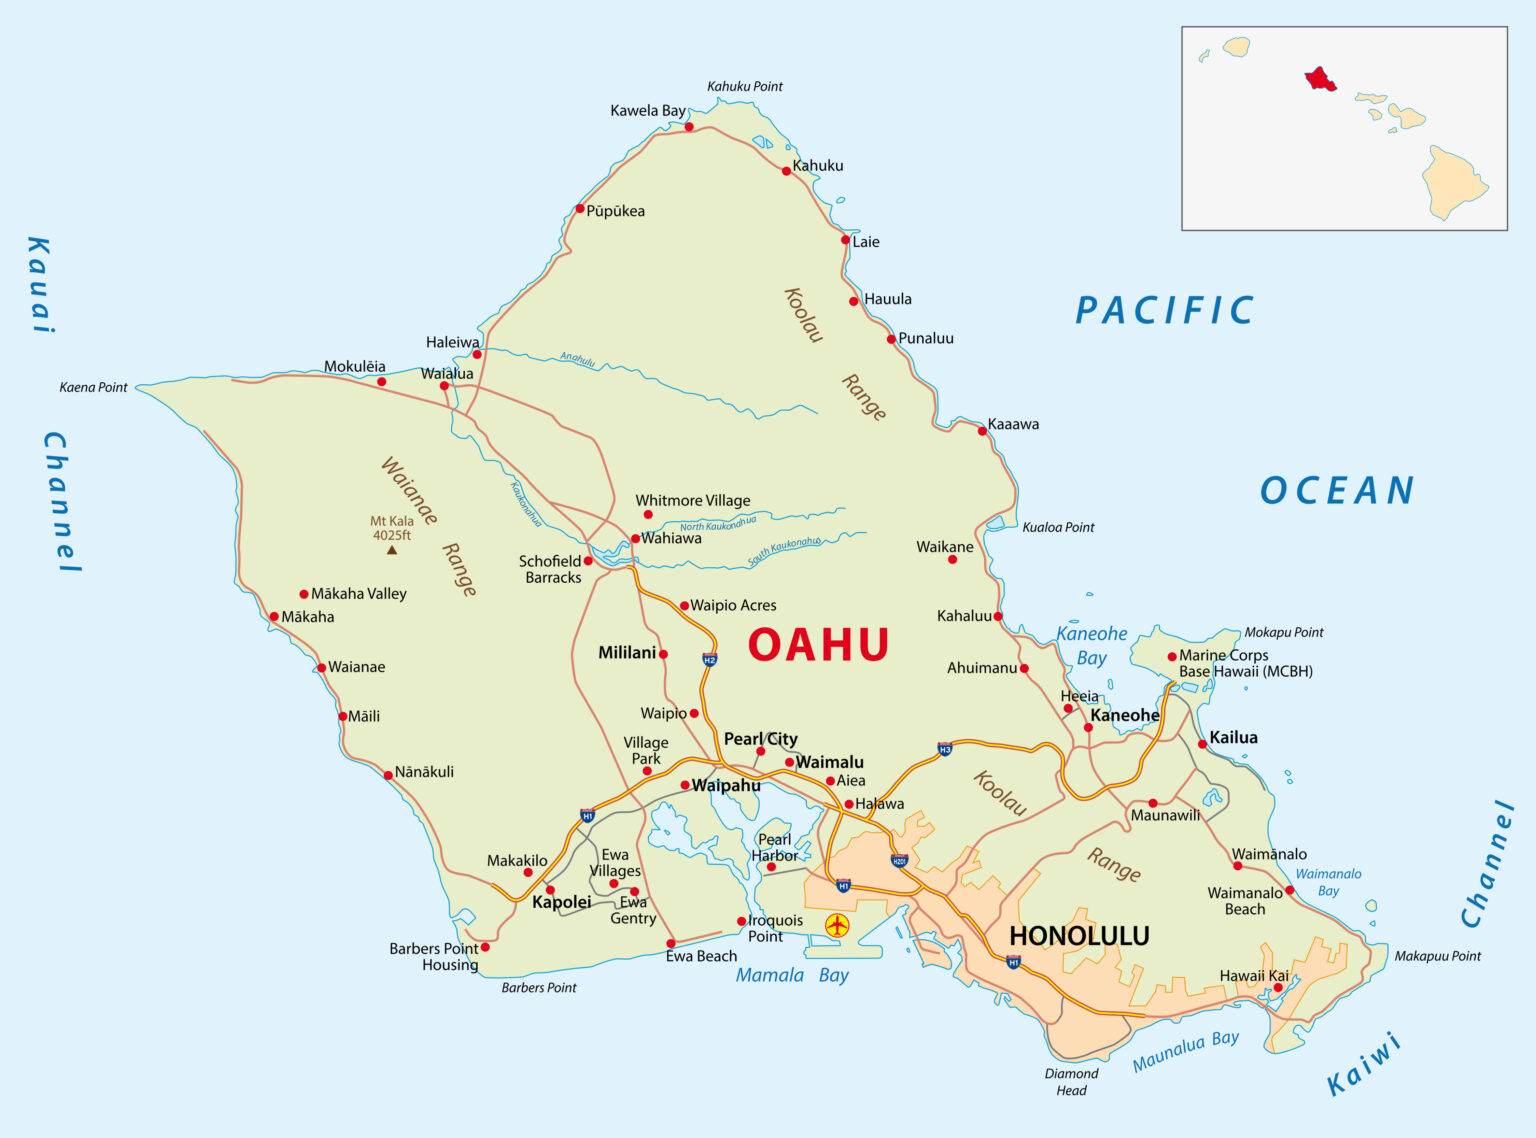 Road map of the island of Oahu.